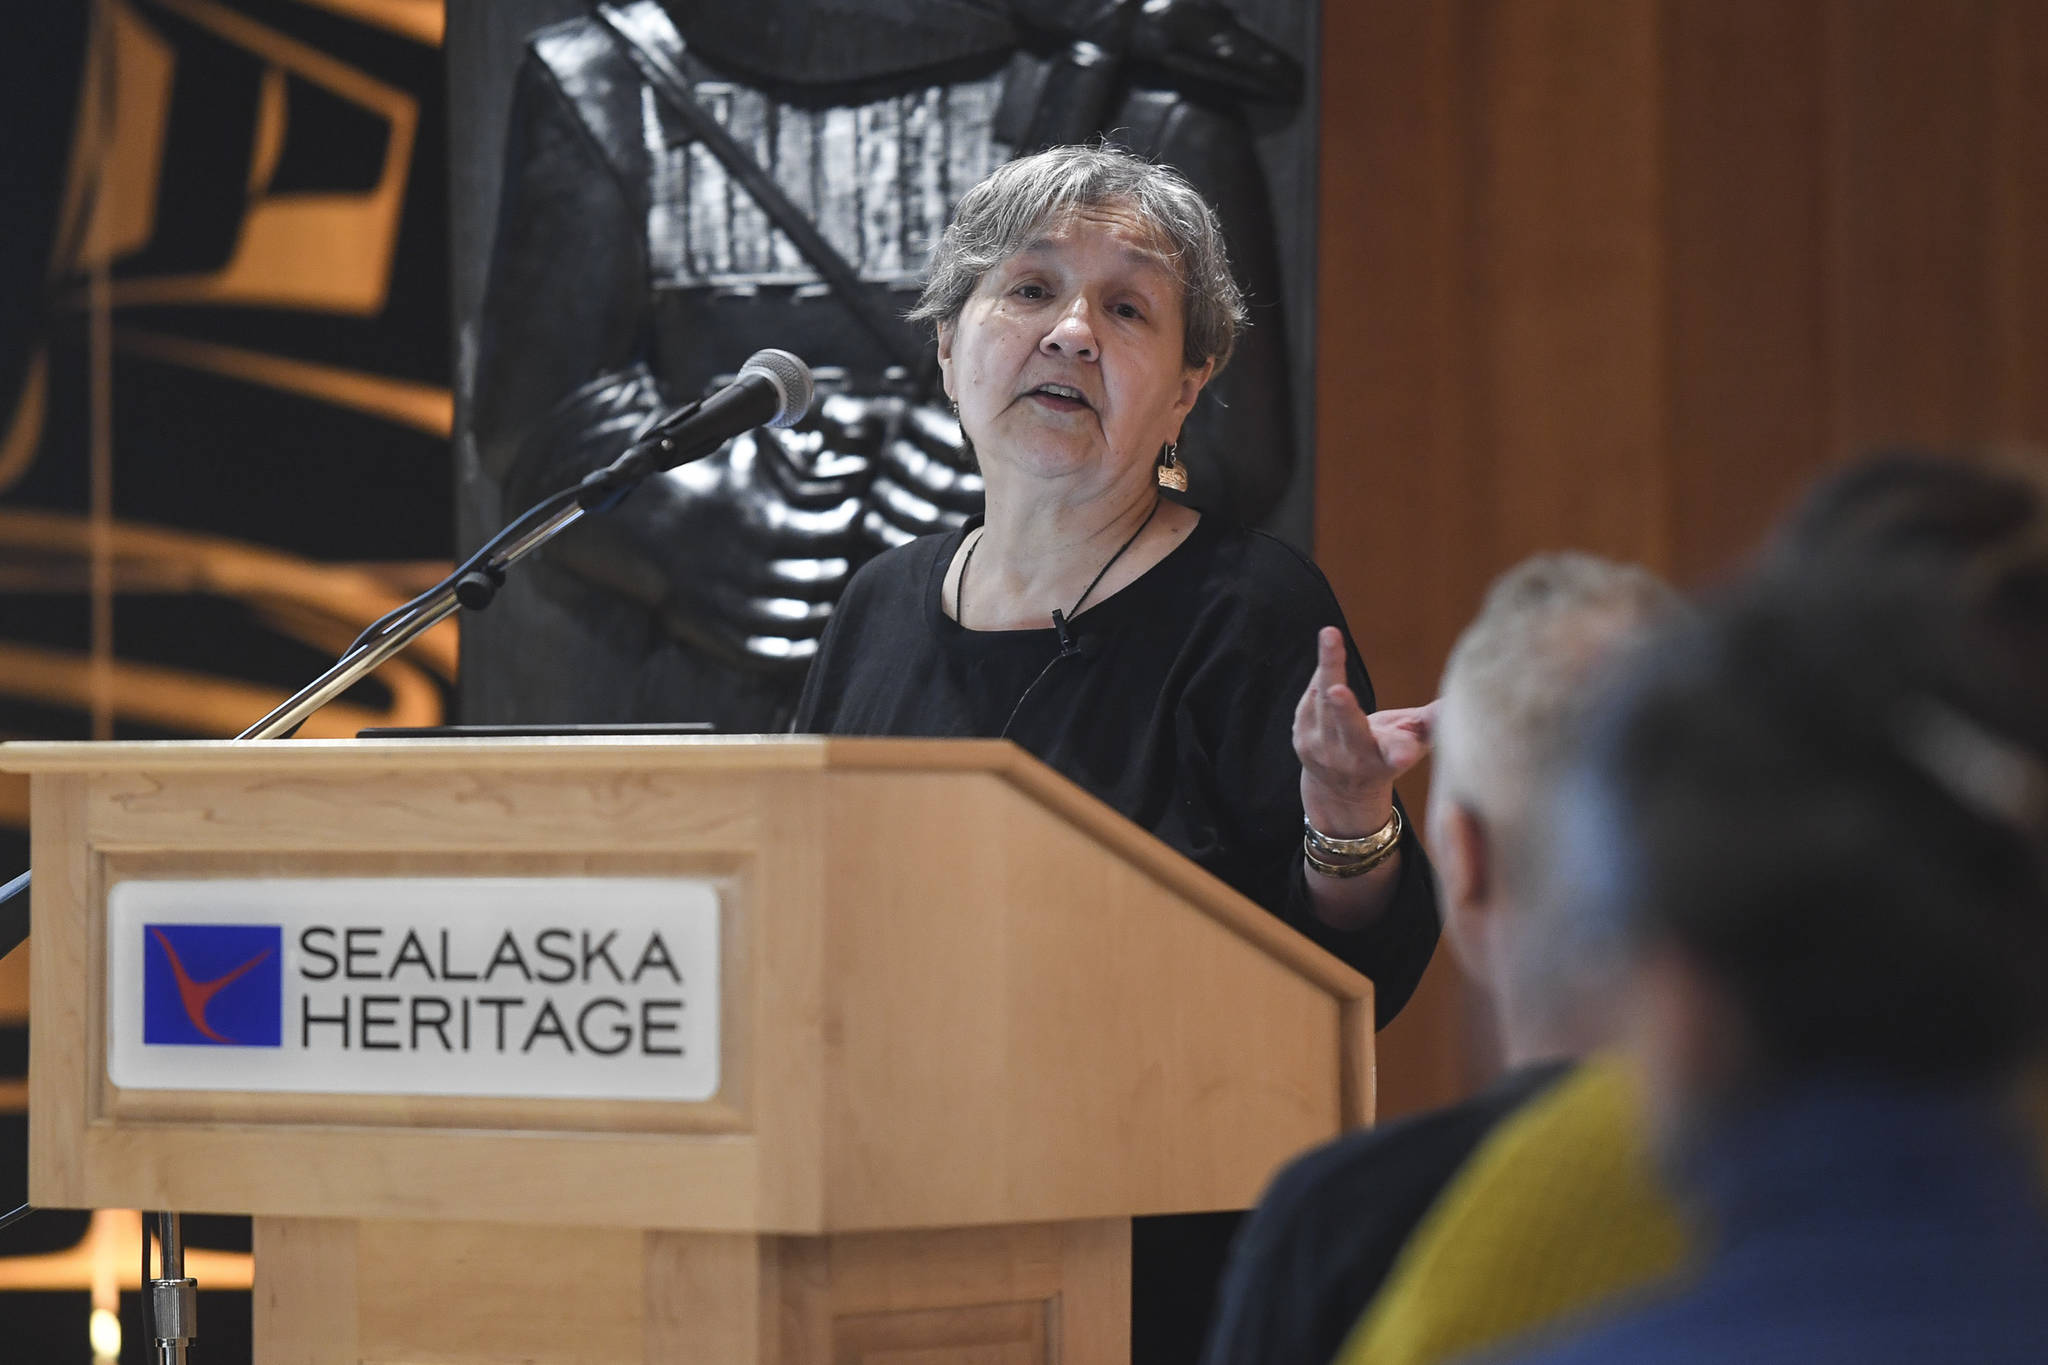 Ernestine Hayes, a Tlingit author and former Alaska State Writer Laureate from 2016-2018, gives a lecture on Juneau’s Indian Village at the Walter Soboleff Center on Monday, Nov. 18, 2019. The lecture is sponsored by the Sealaska Heritage Institute. (Michael Penn | Juneau Empire)